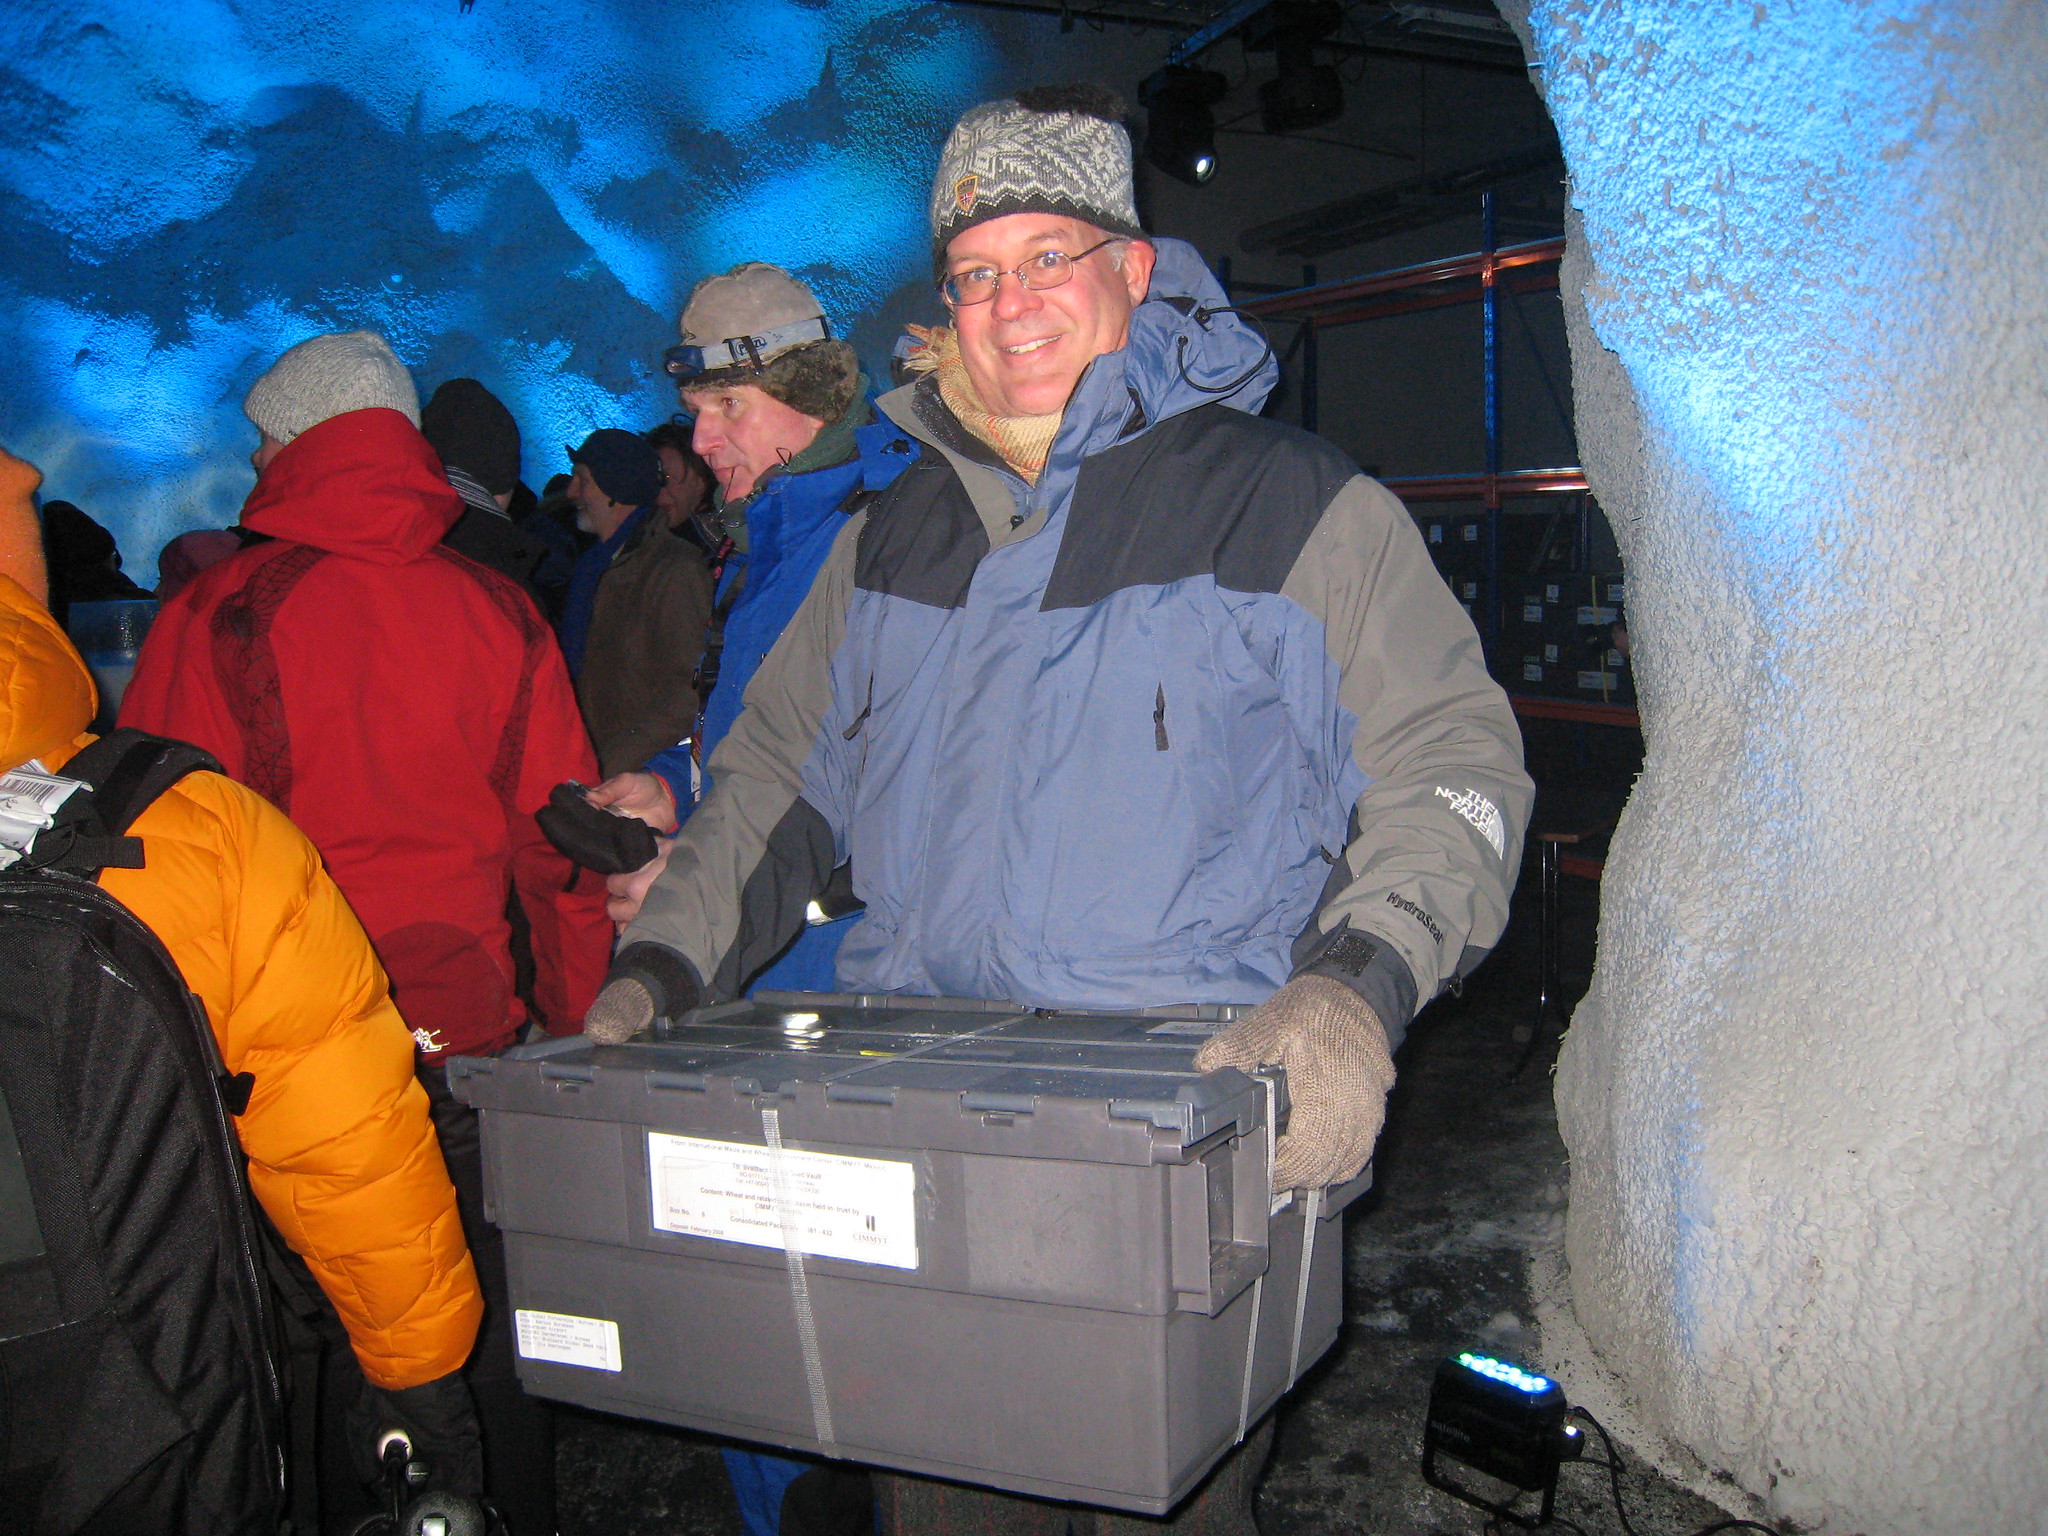 Tom Payne at the Global Seed Vault in Svalbard, Norway, for the official opening ceremony in 2008. He holds one of the sealed boxes used to store the nearly 50,000 unique maize and wheat seed collections deposited by CIMMYT. (Photo: Thomas Lumpkin/CIMMYT)